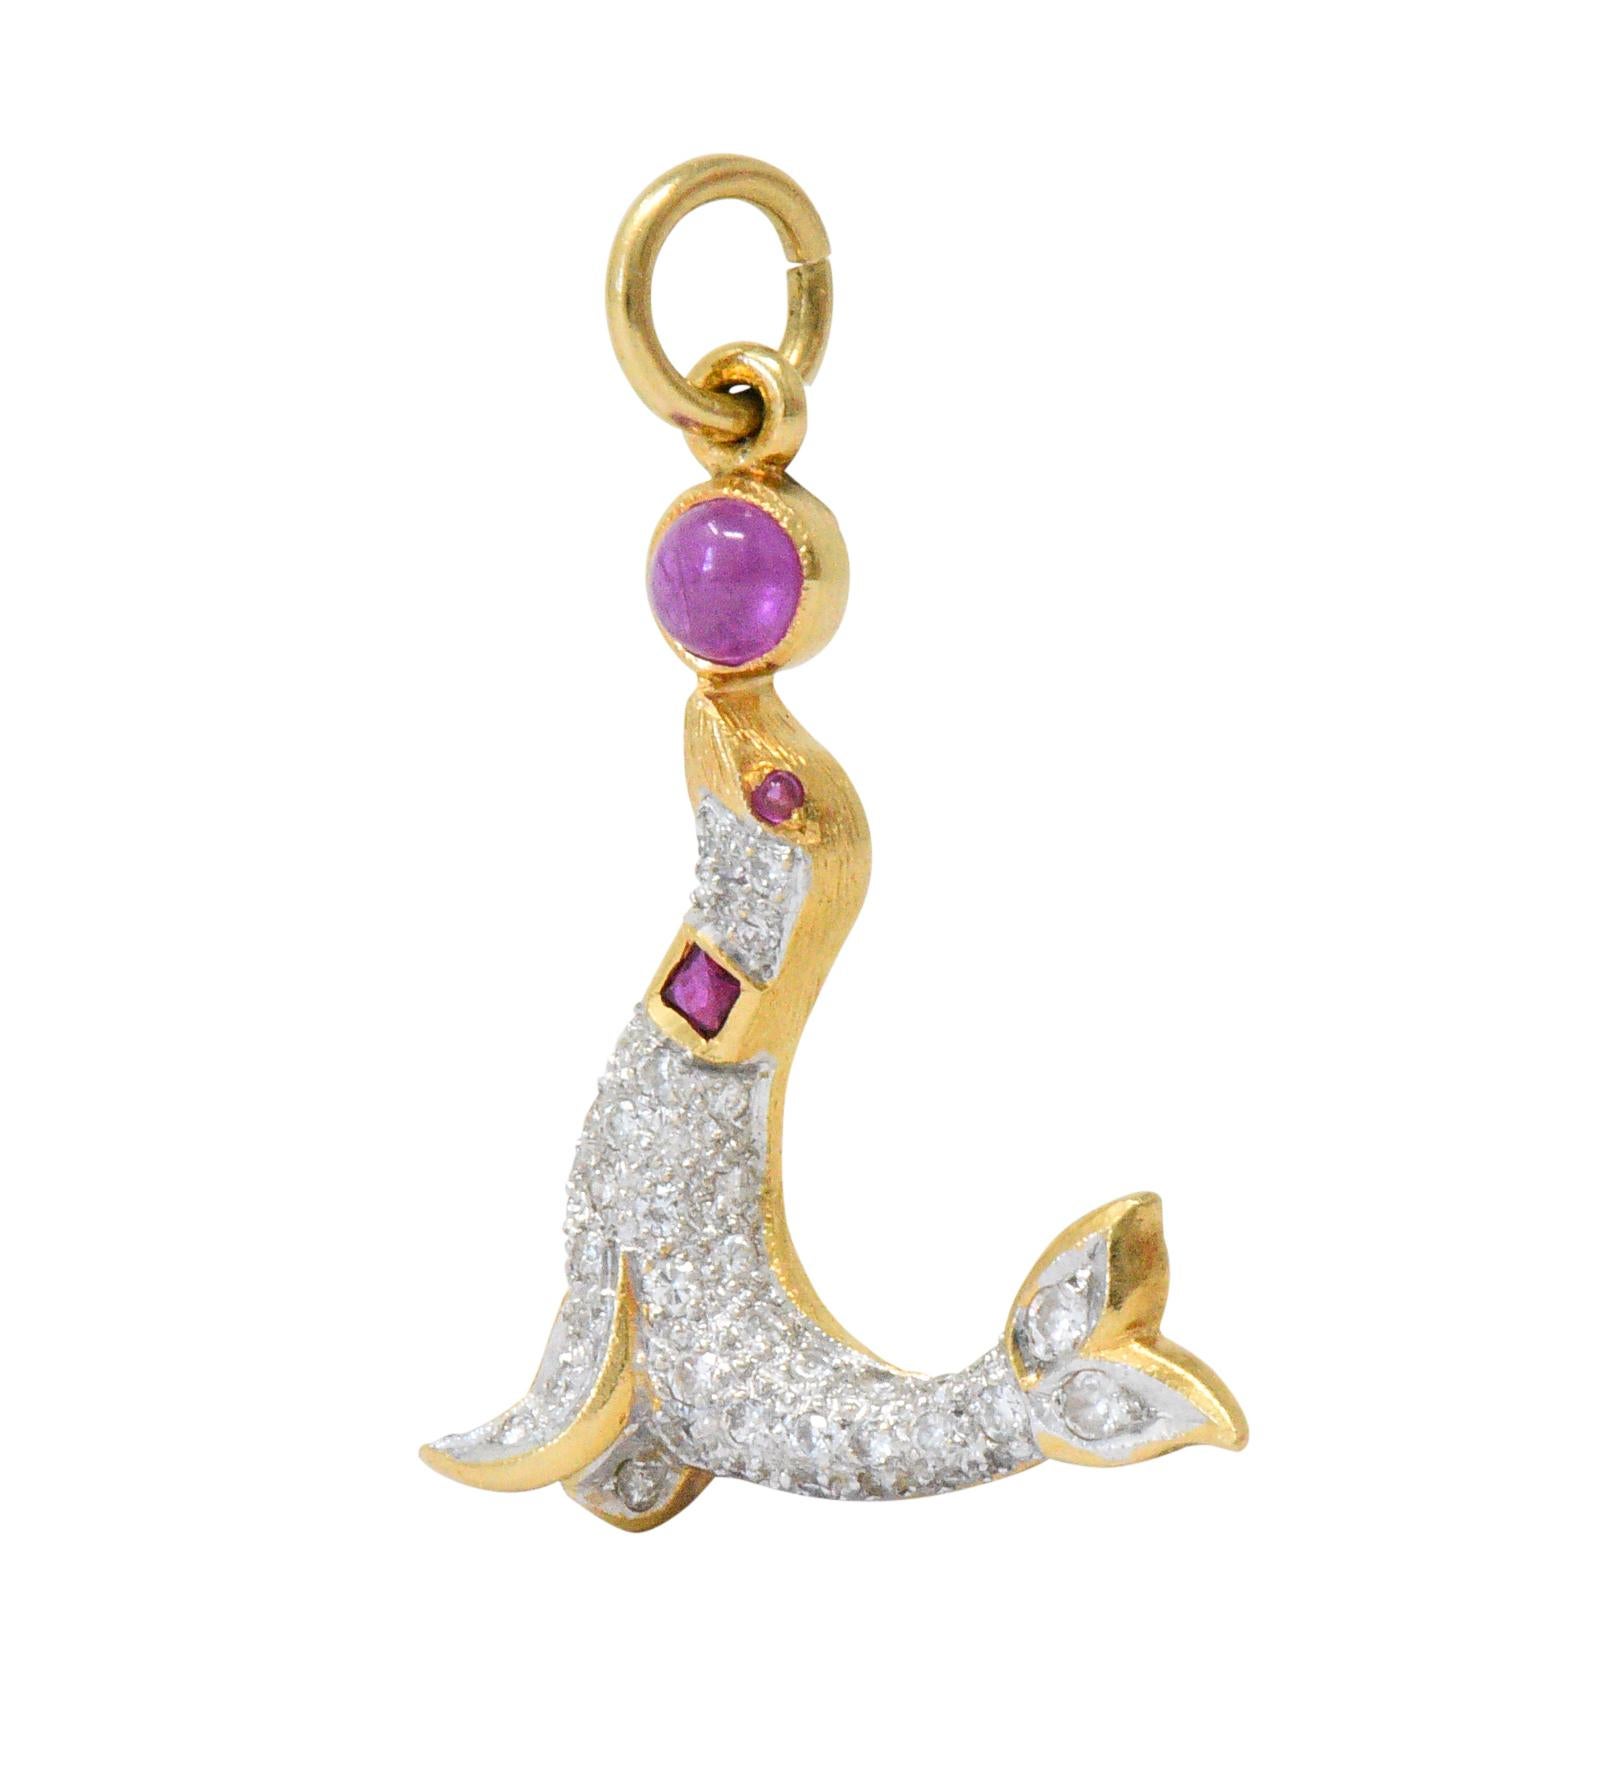 Charm is designed as a circus seal balancing a red ruby cabochon ball on its nose; translucent and a slightly purplish-red color

Pavè set throughout by round brilliant cut diamonds weighing approximately 0.80 carat total; eye-clean and